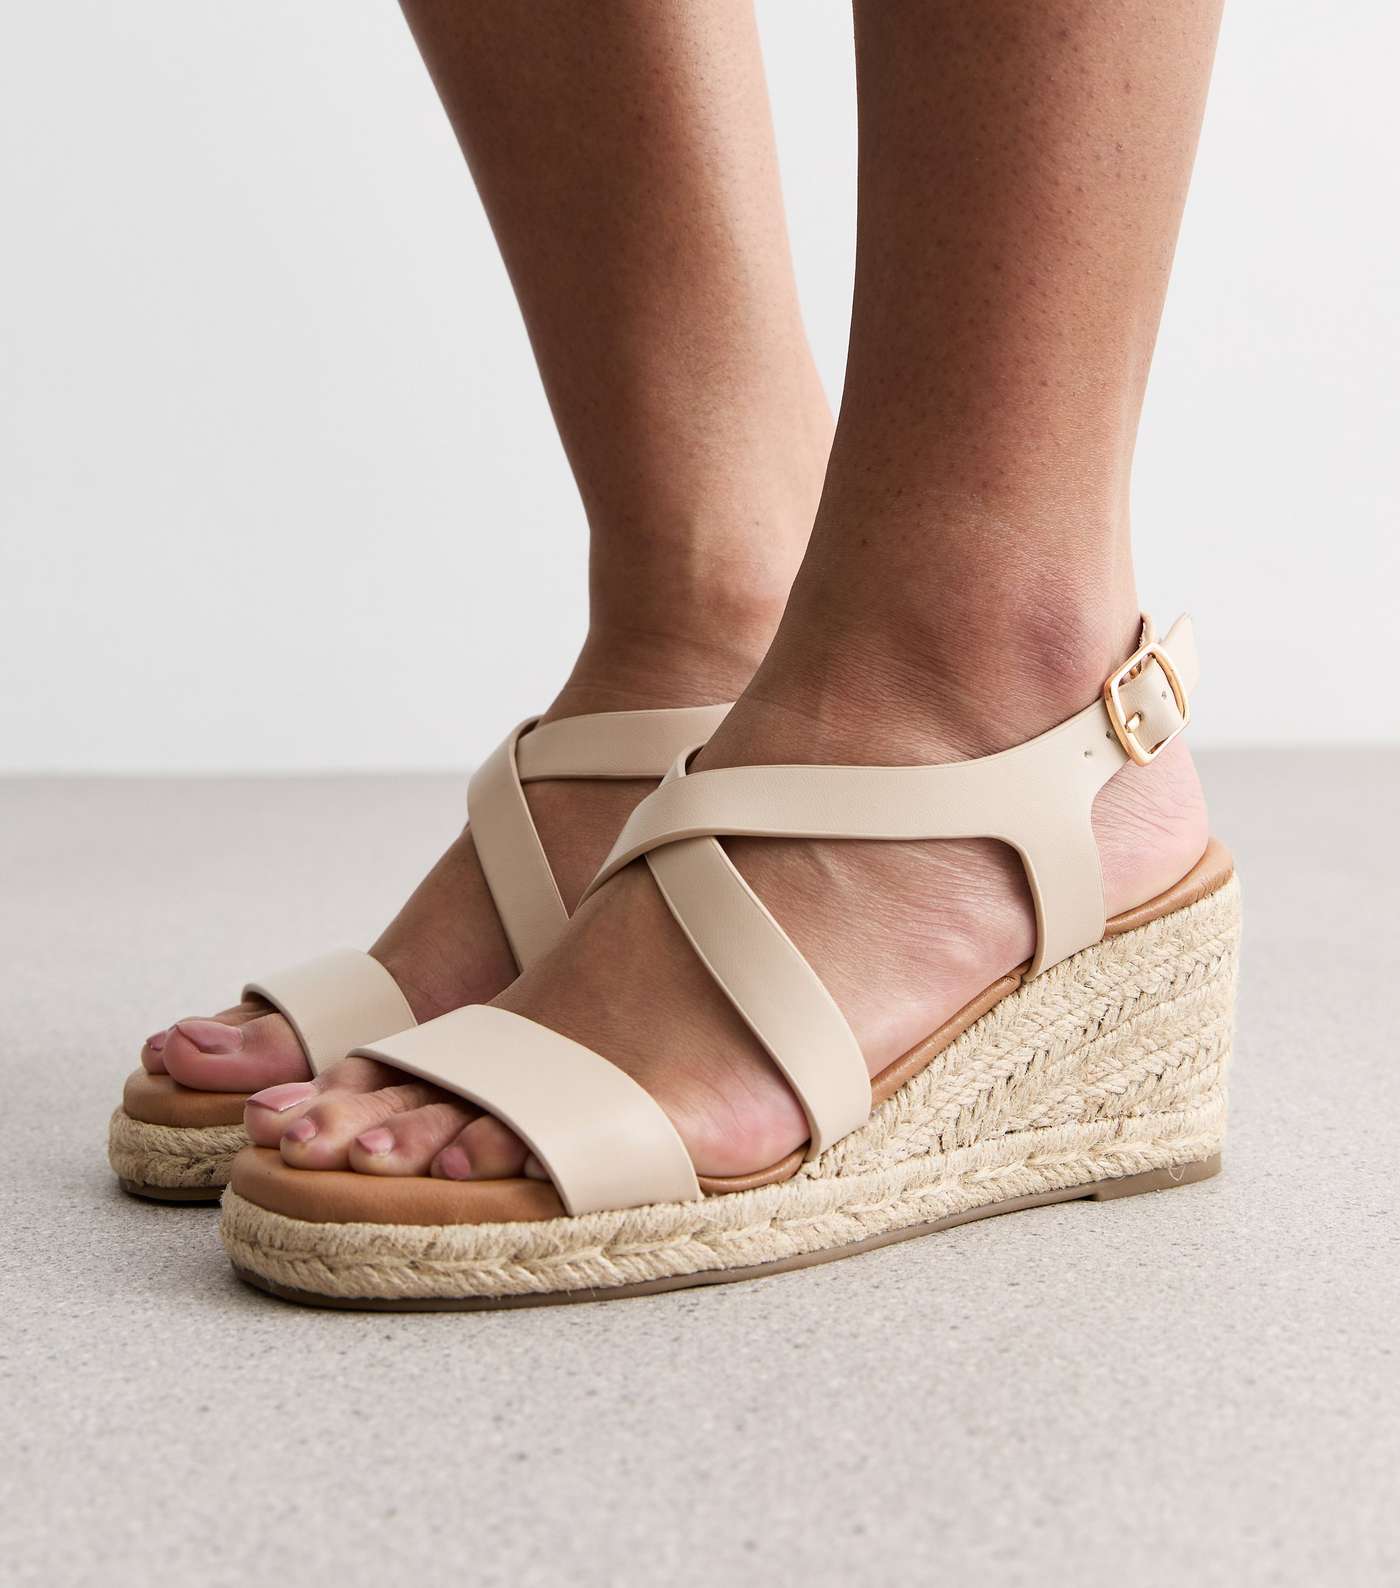 Off White Leather-Look Espadrille Wedge Heel Sandals Image 2